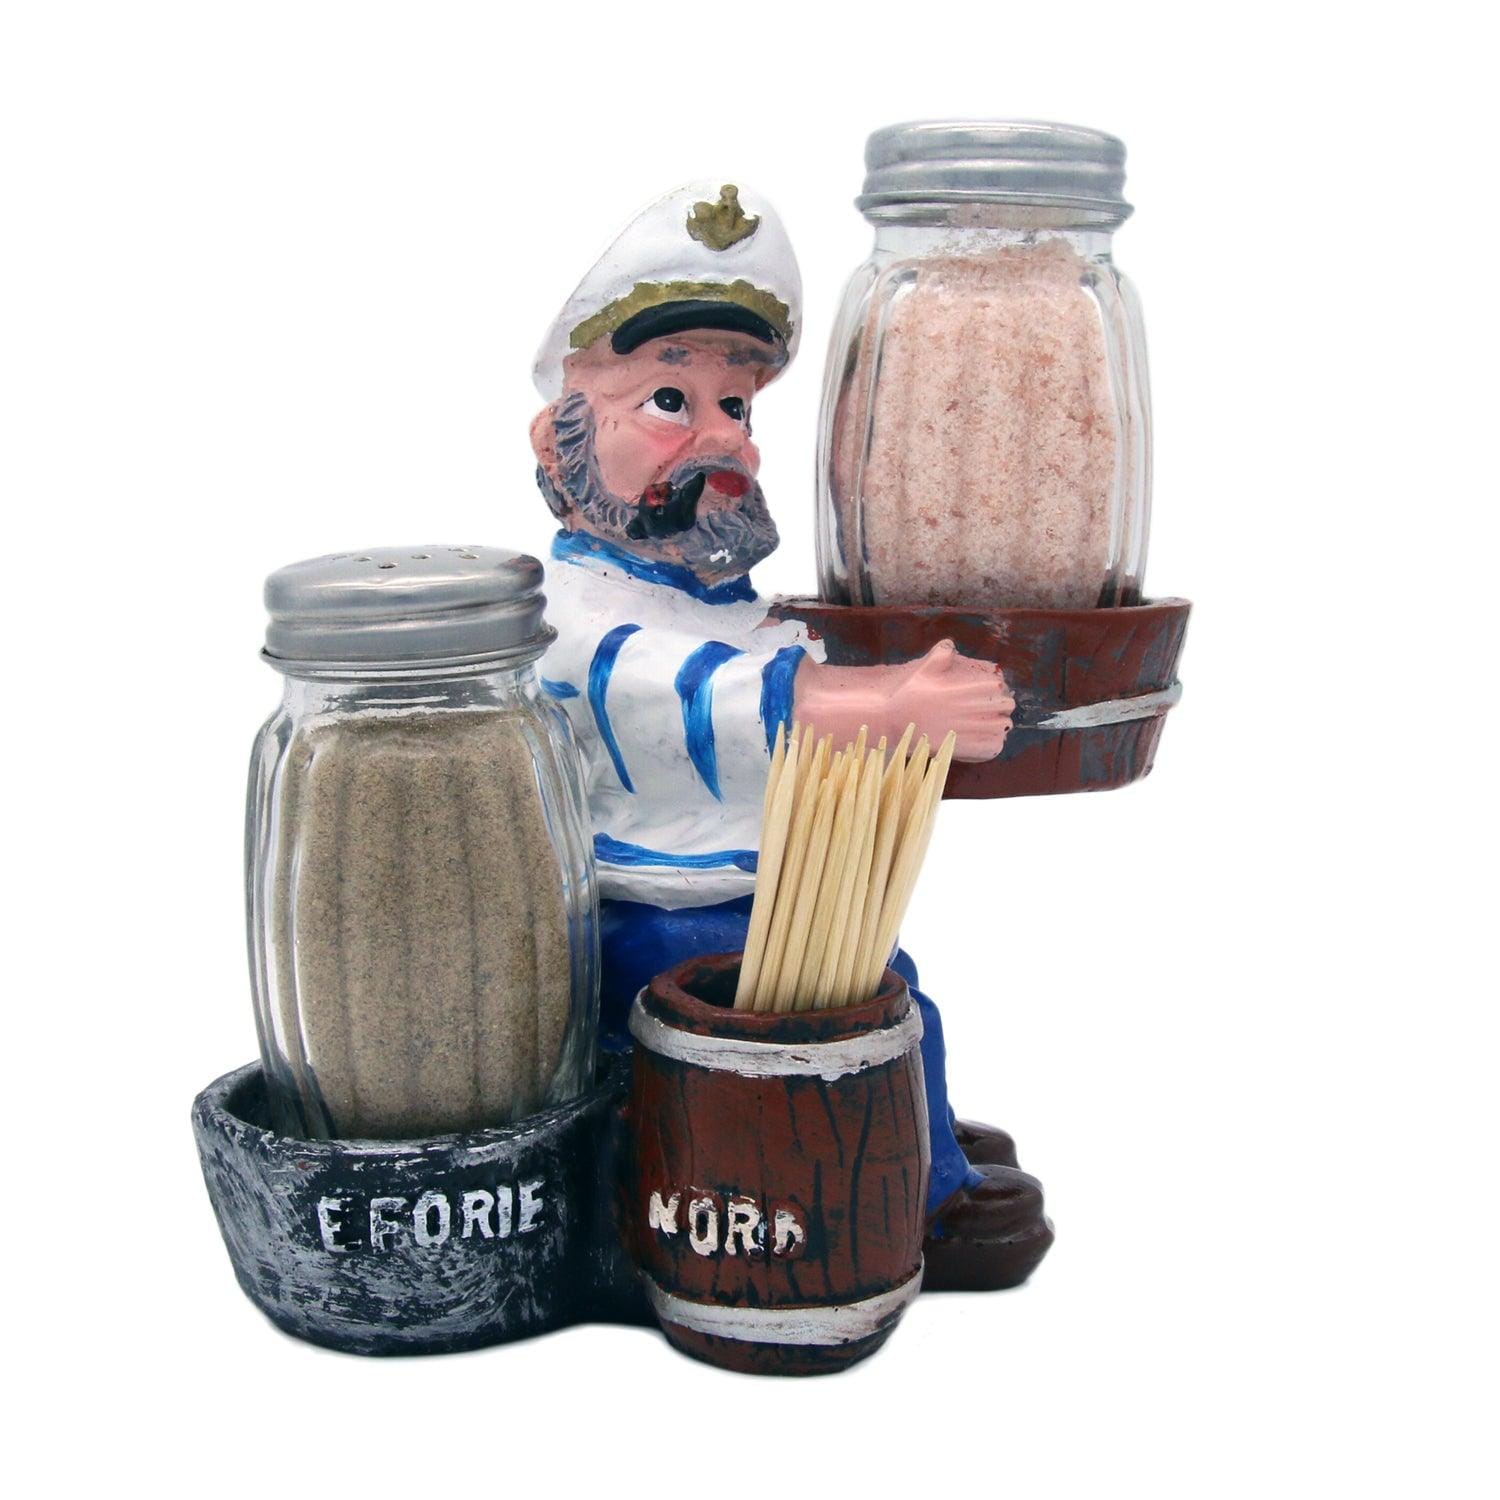 Nautical Sailor Figurine Resin Salt & Pepper Shakers with Toothpick & Napkin Holder Set (Blue in White)